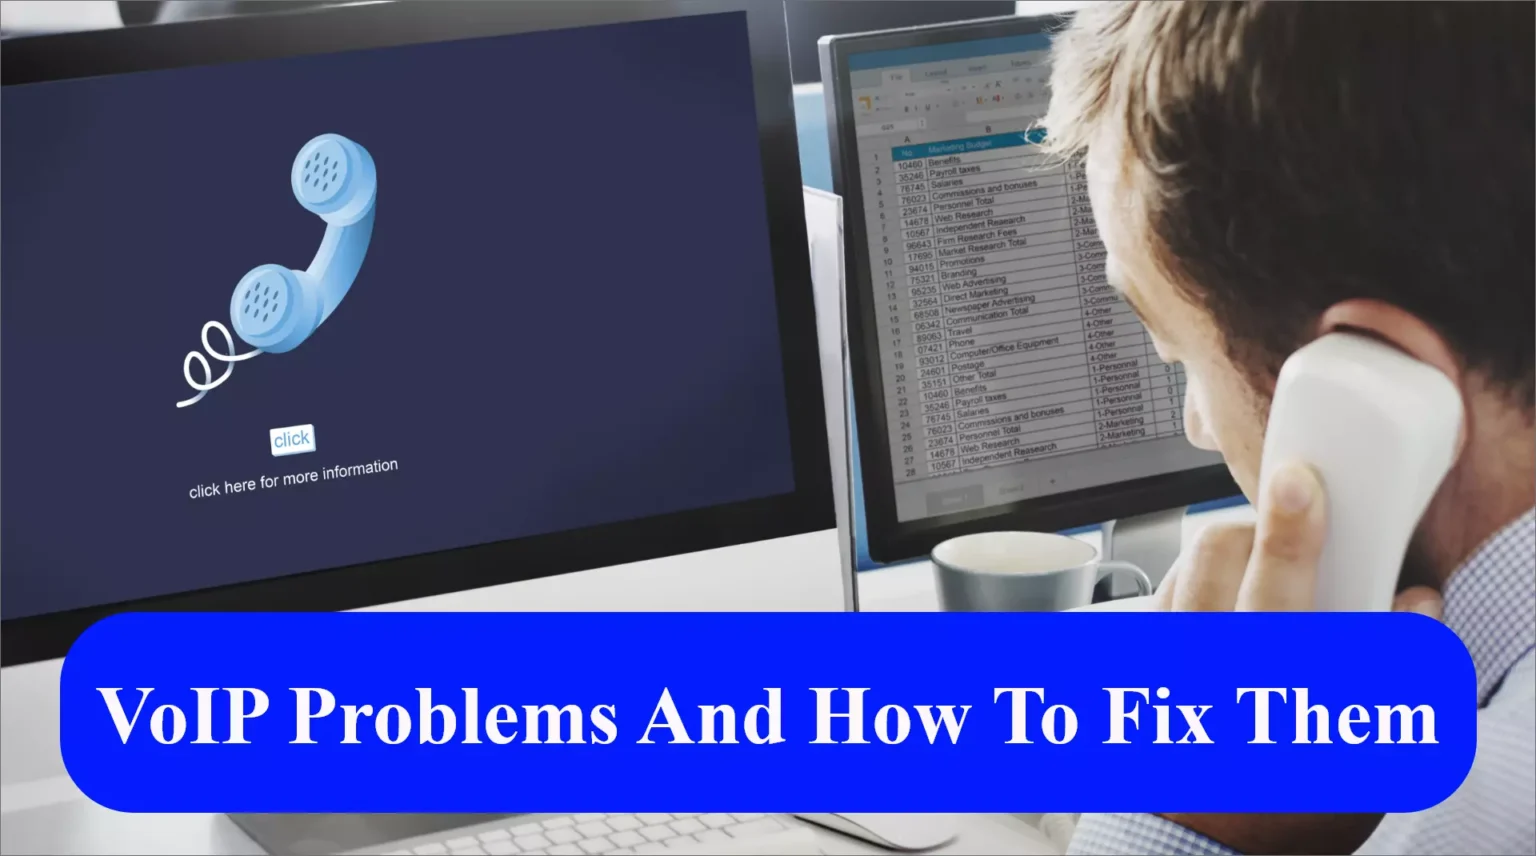 VoIP Problems And How To Fix